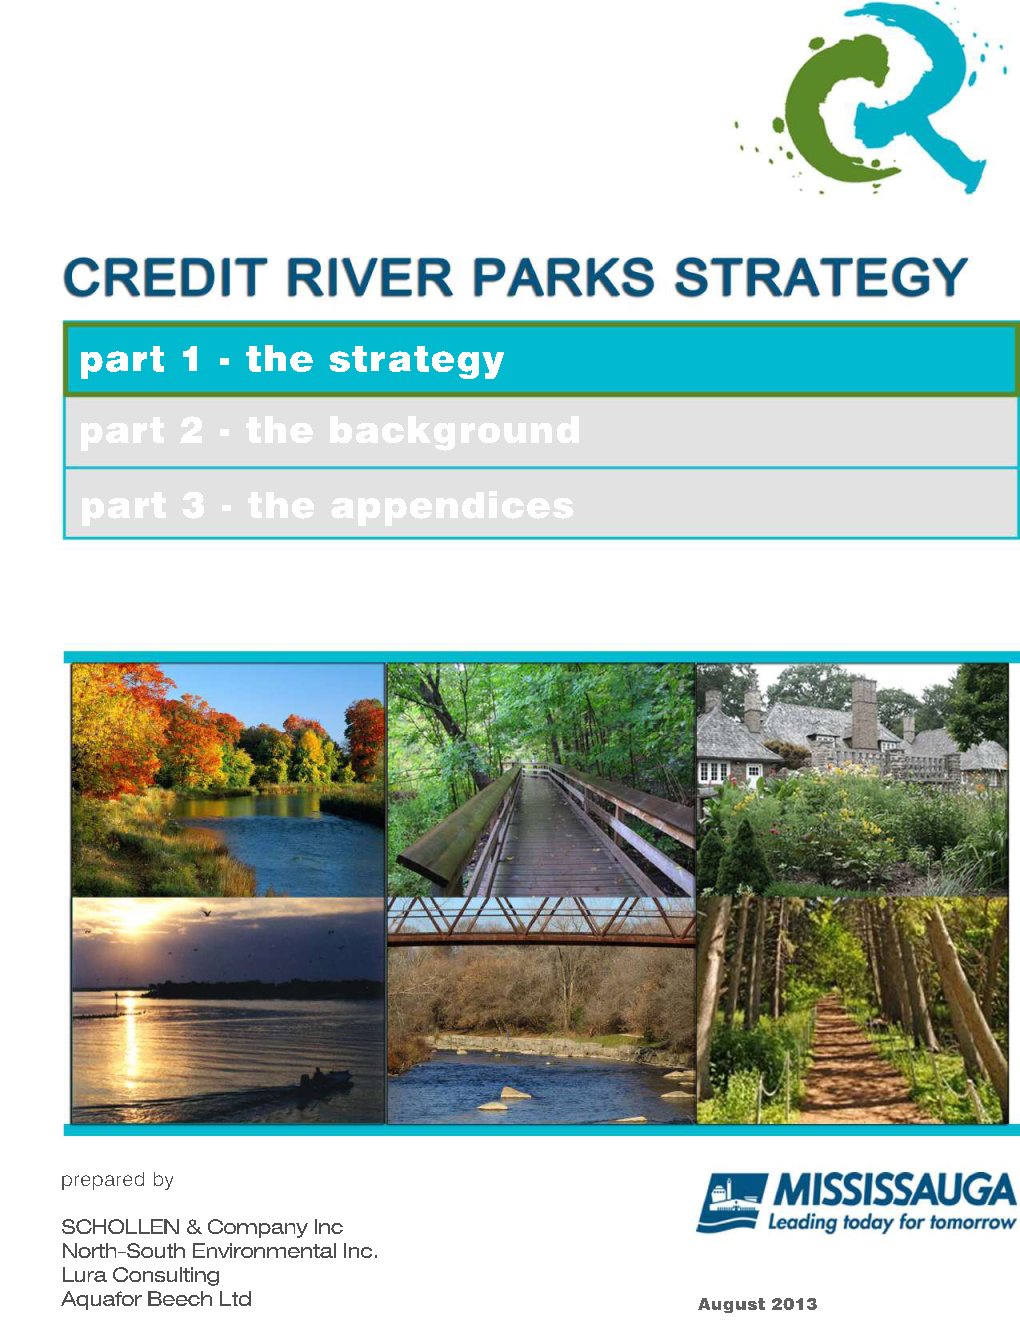 Part 1 – the Strategy – Is One of the Three Inter-Related Reports That Comprise the Credit River Parks Strategy